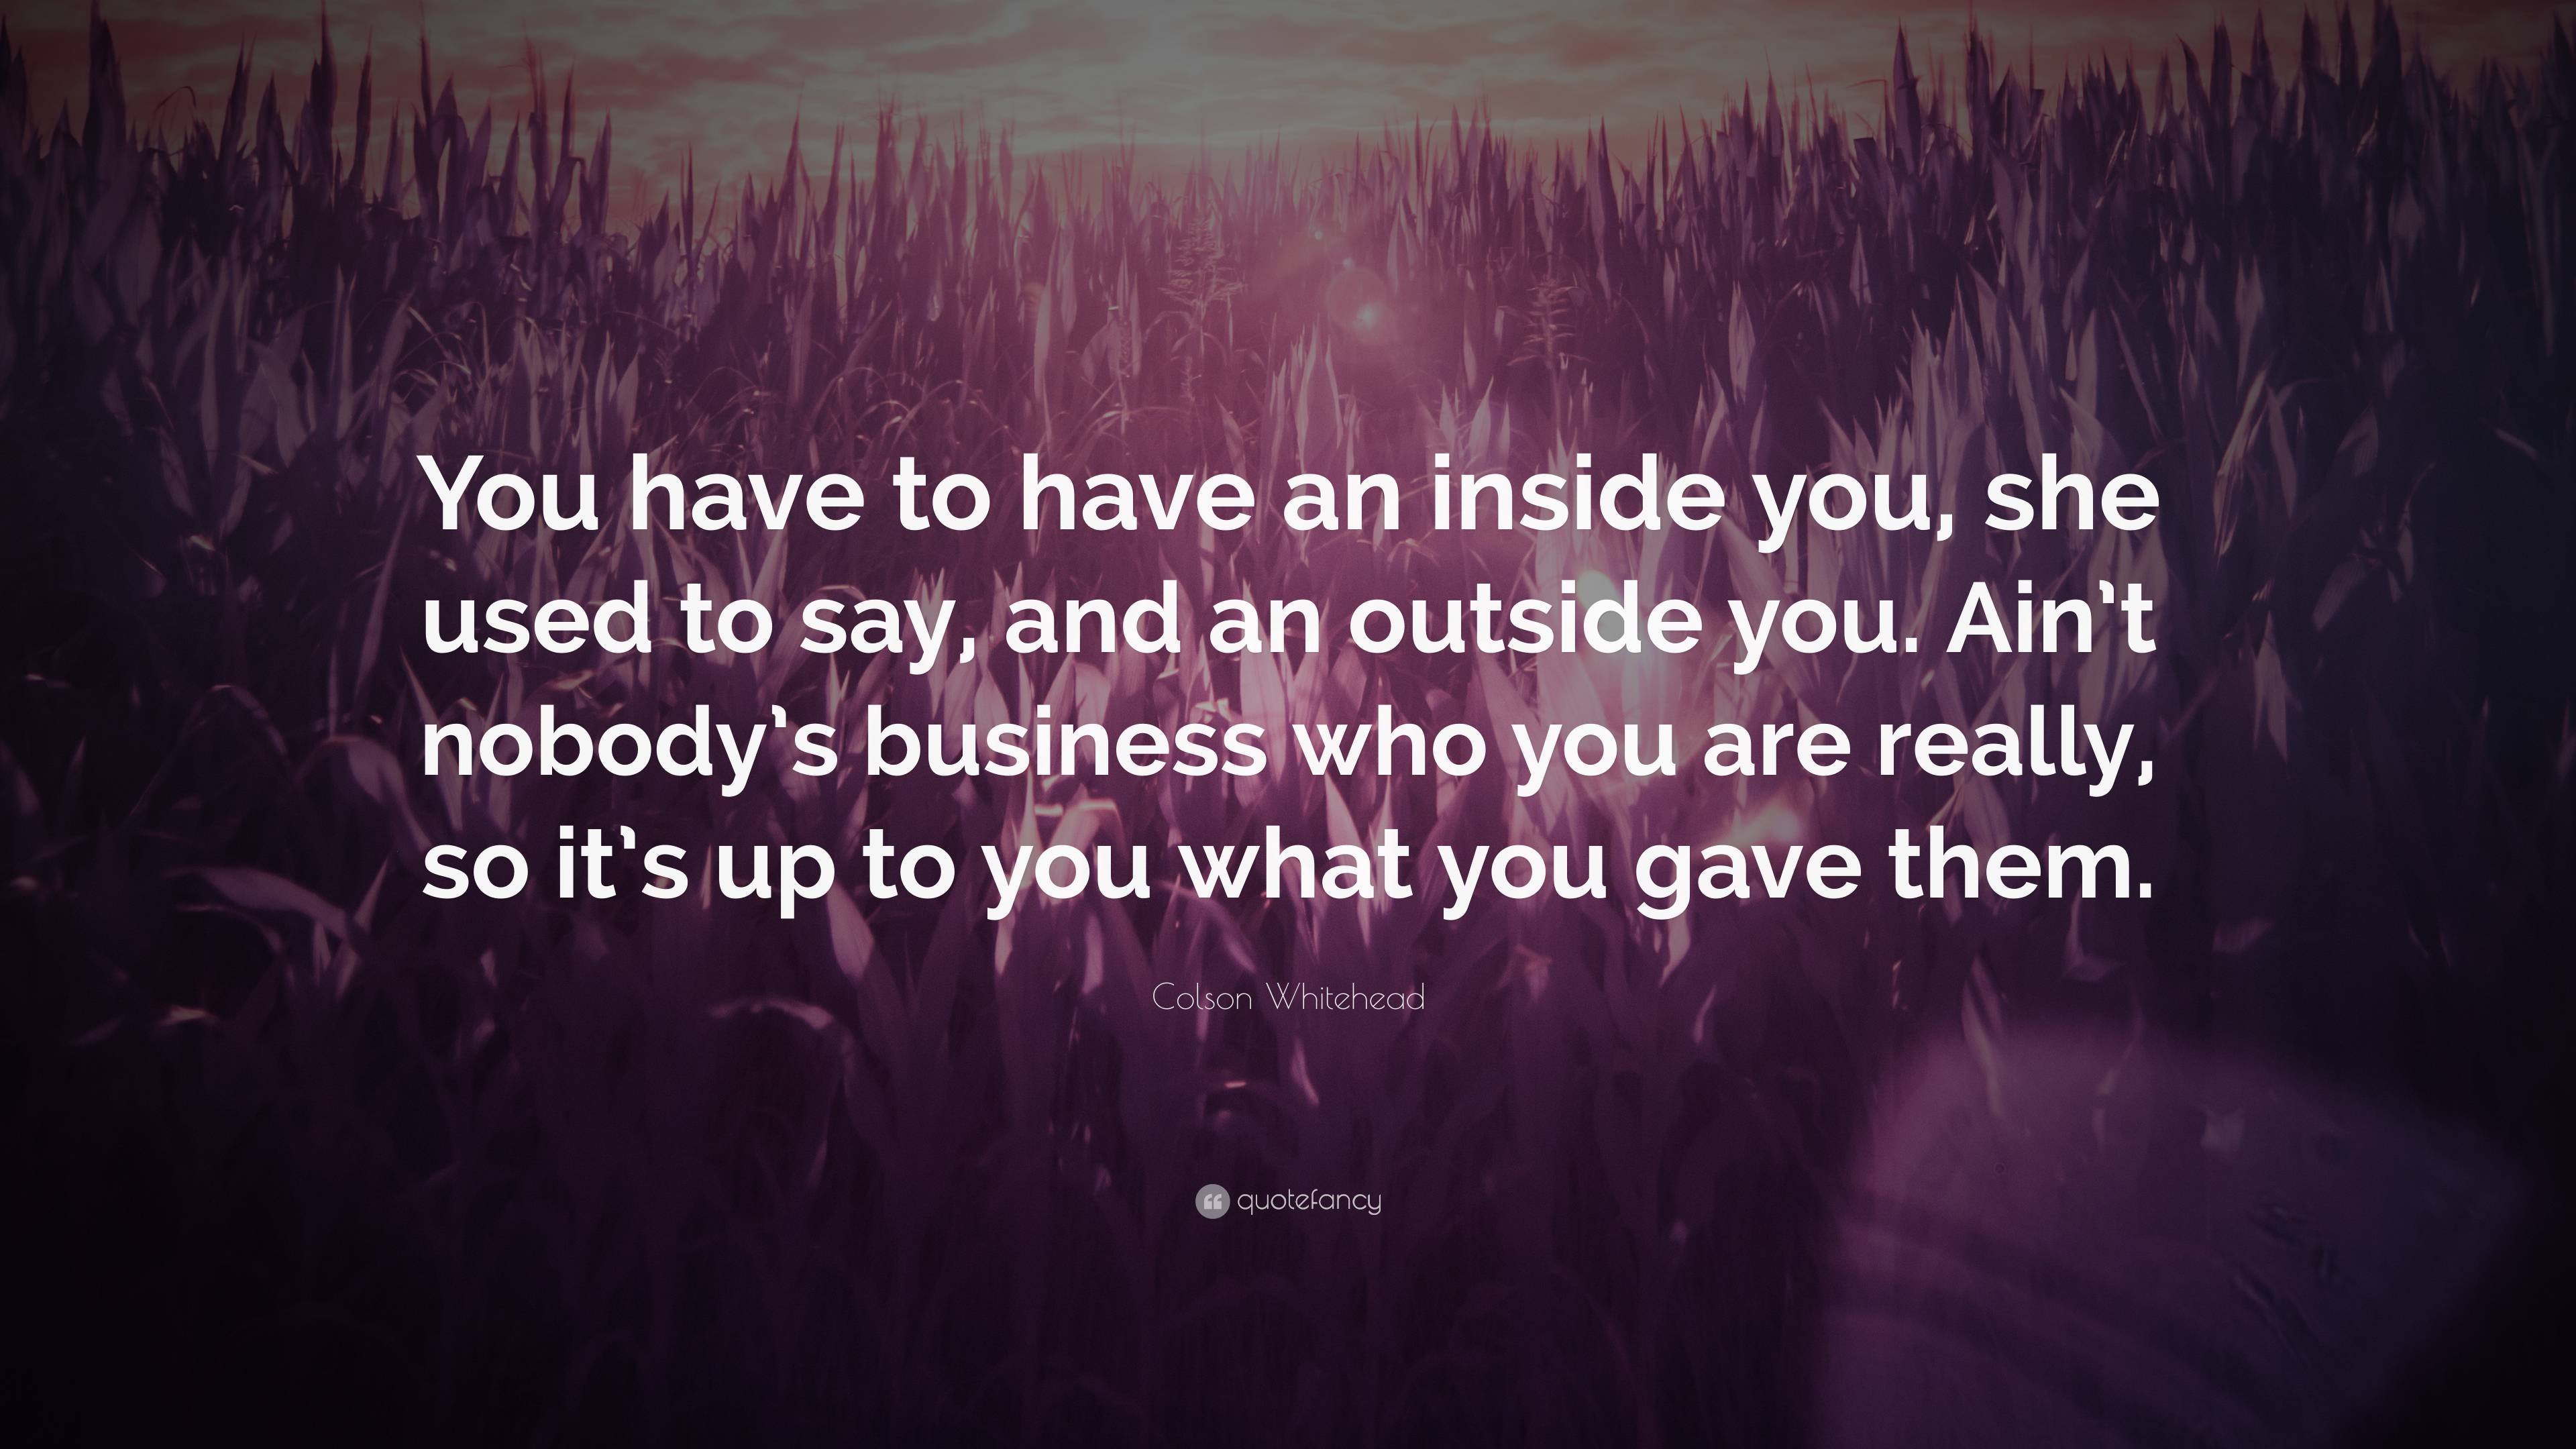 Colson Whitehead Quote: “You have to have an inside you, she used to ...